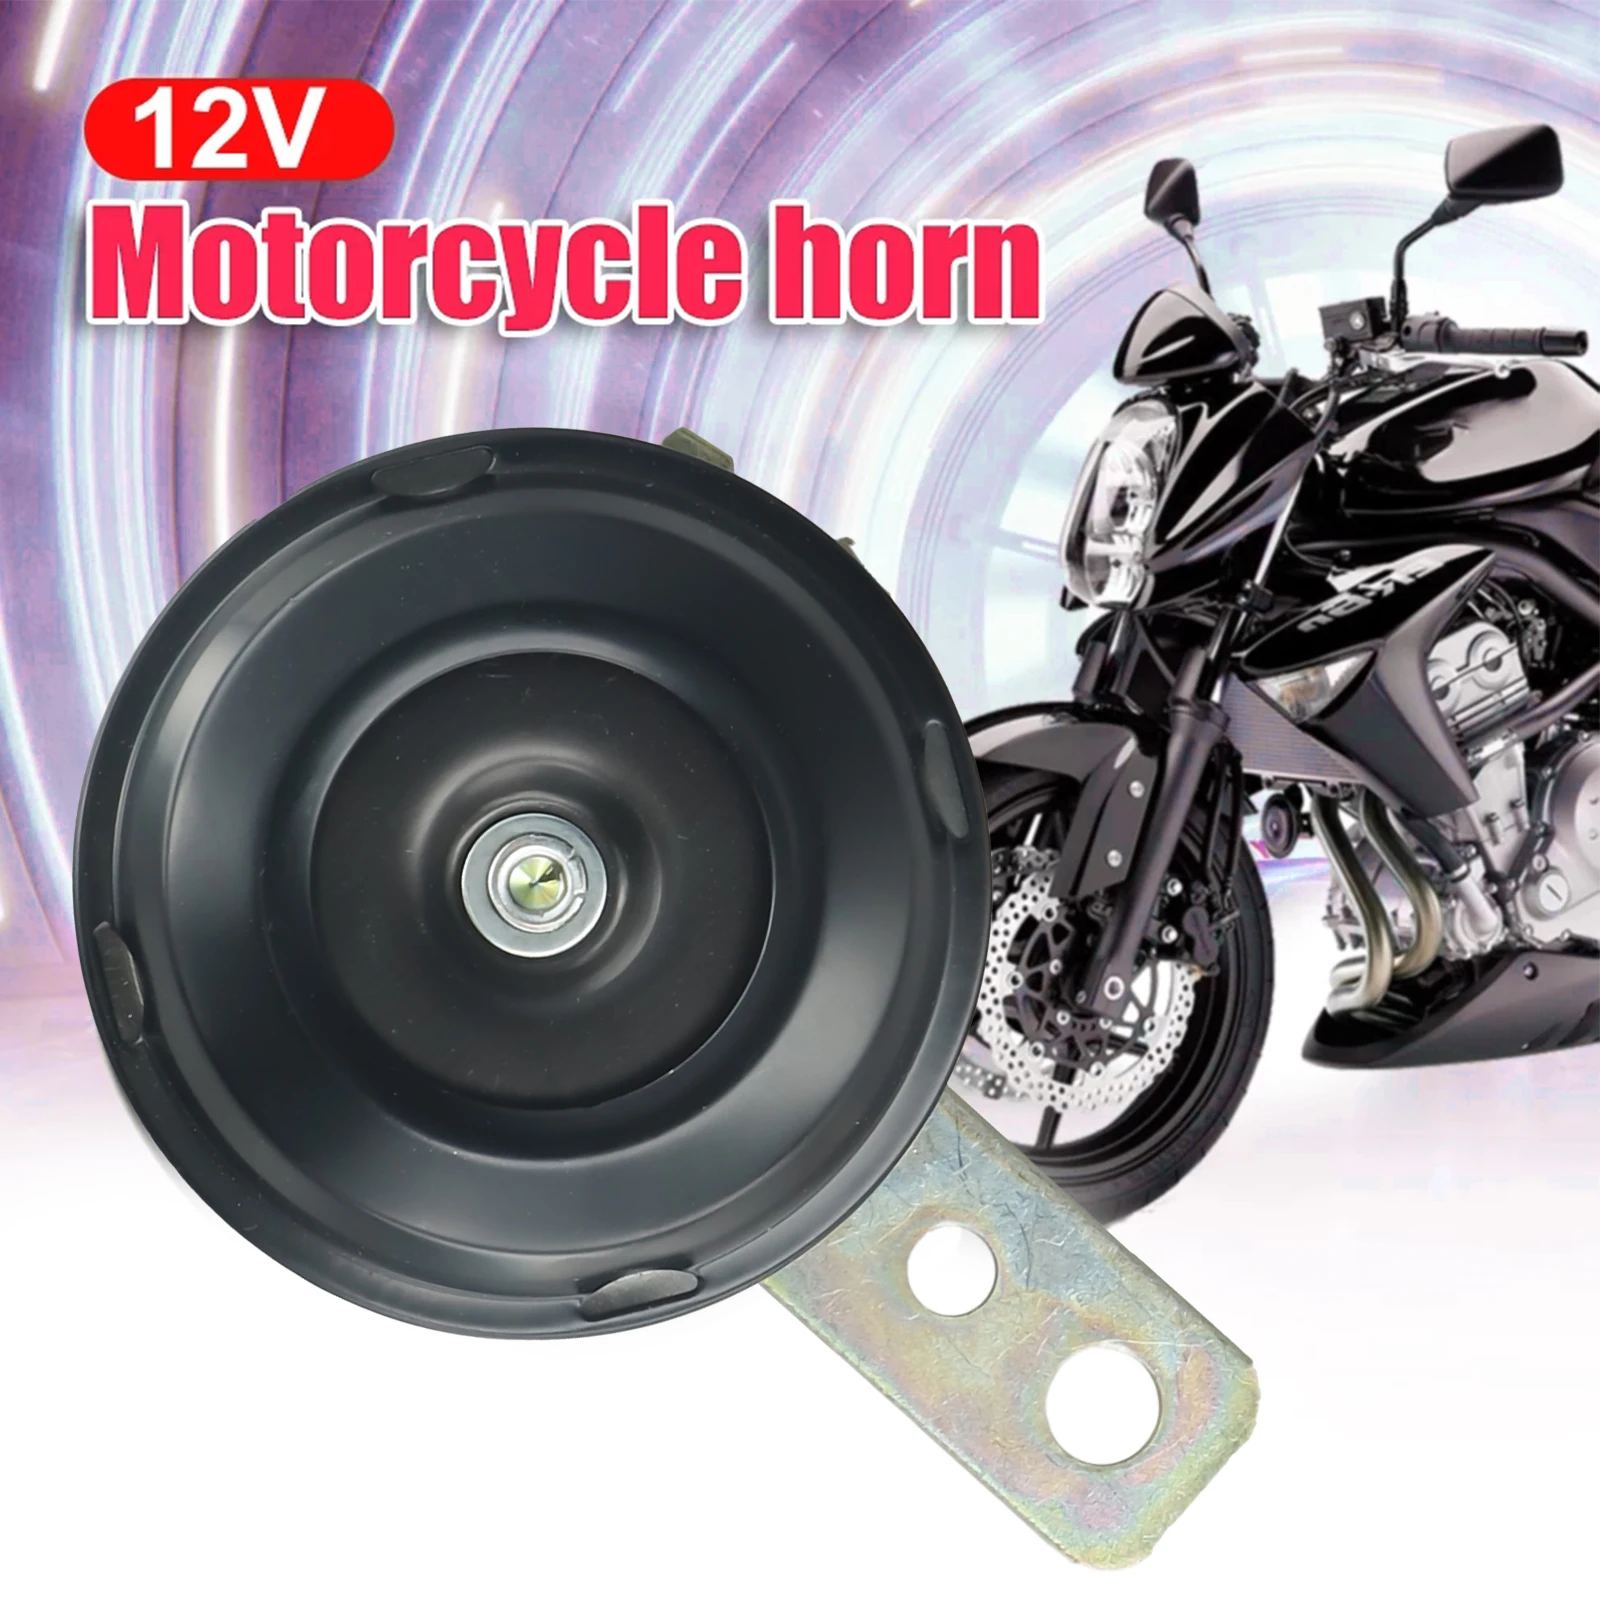 

Motorcycle Horn 12v Black Electric Horn Loud 105db Strong Shock Universal Zirconia Sand 1 Pcs 12V 1.5A Brand New